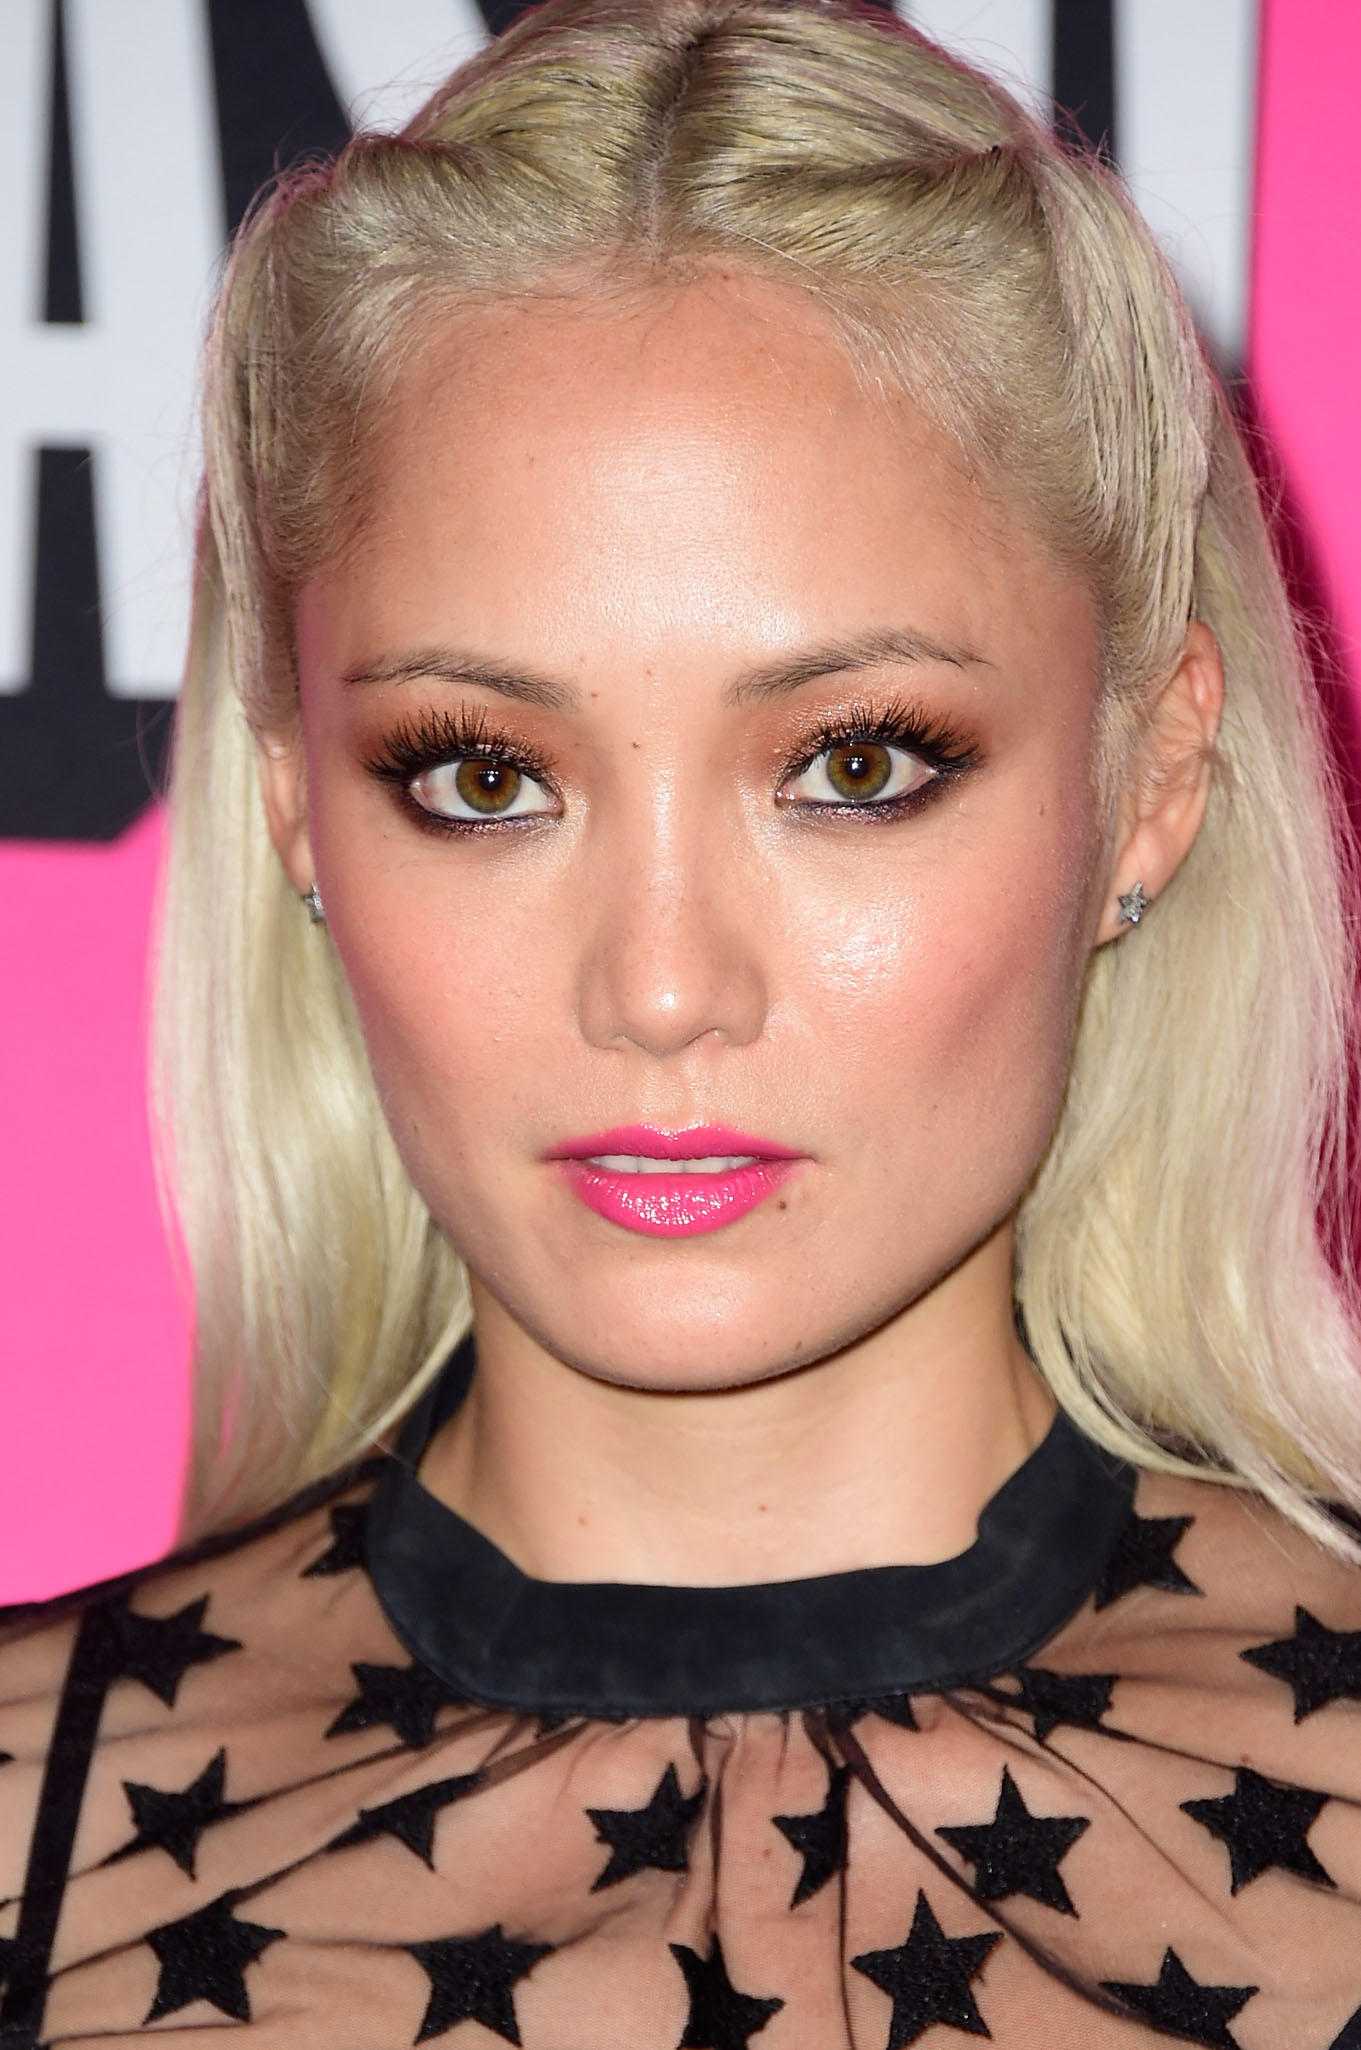 70+ Hot Pictures Of Pom Klementieff Who Plays Mantis In Marvel Cinematic Universe 232